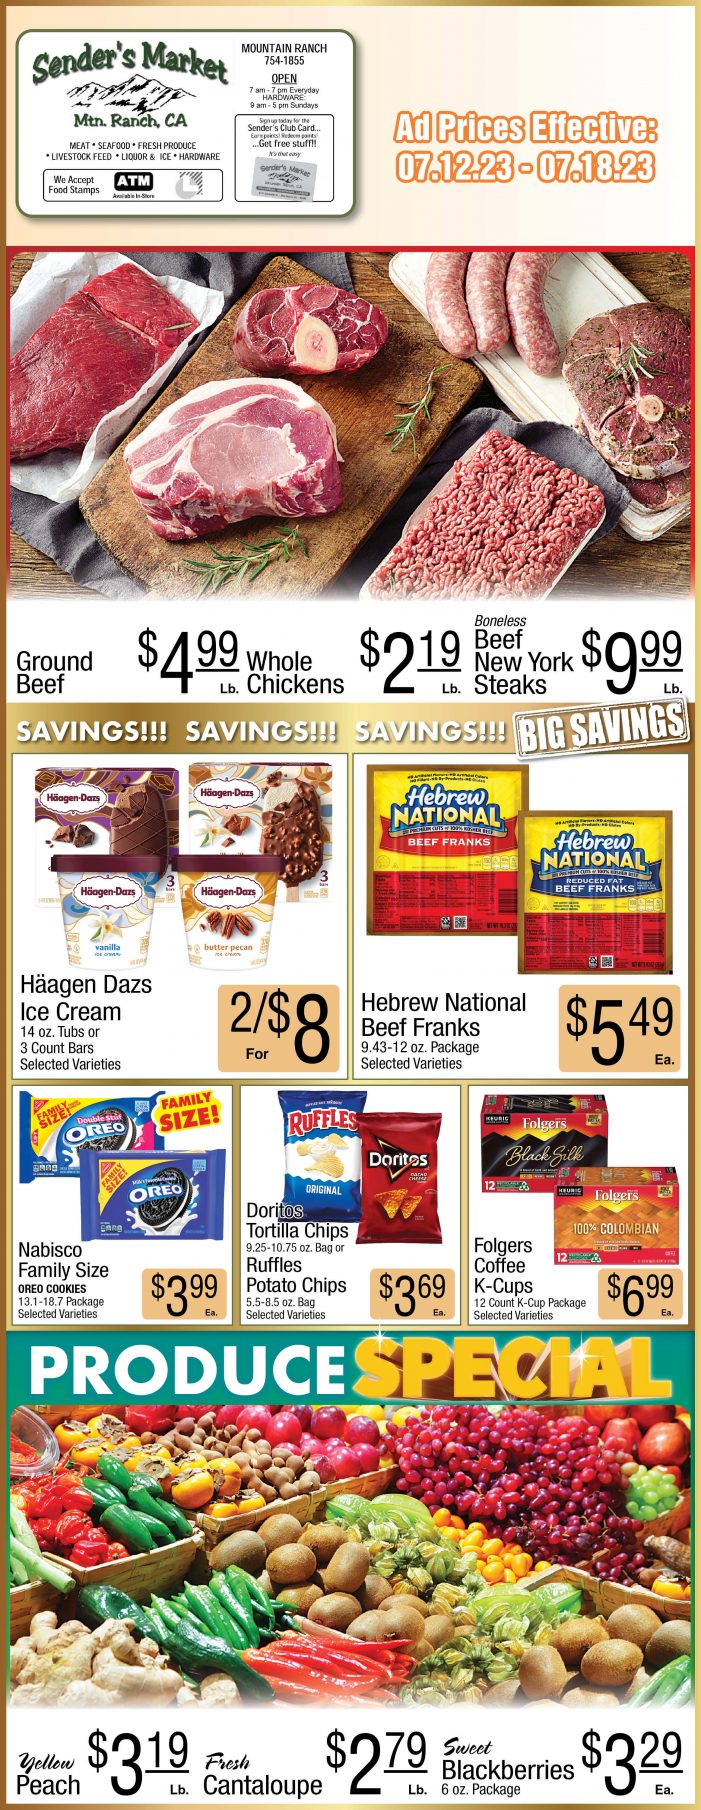 Sender’s Market Weekly Ad & Grocery Specials Through July 18th! Shop Local & Save!!